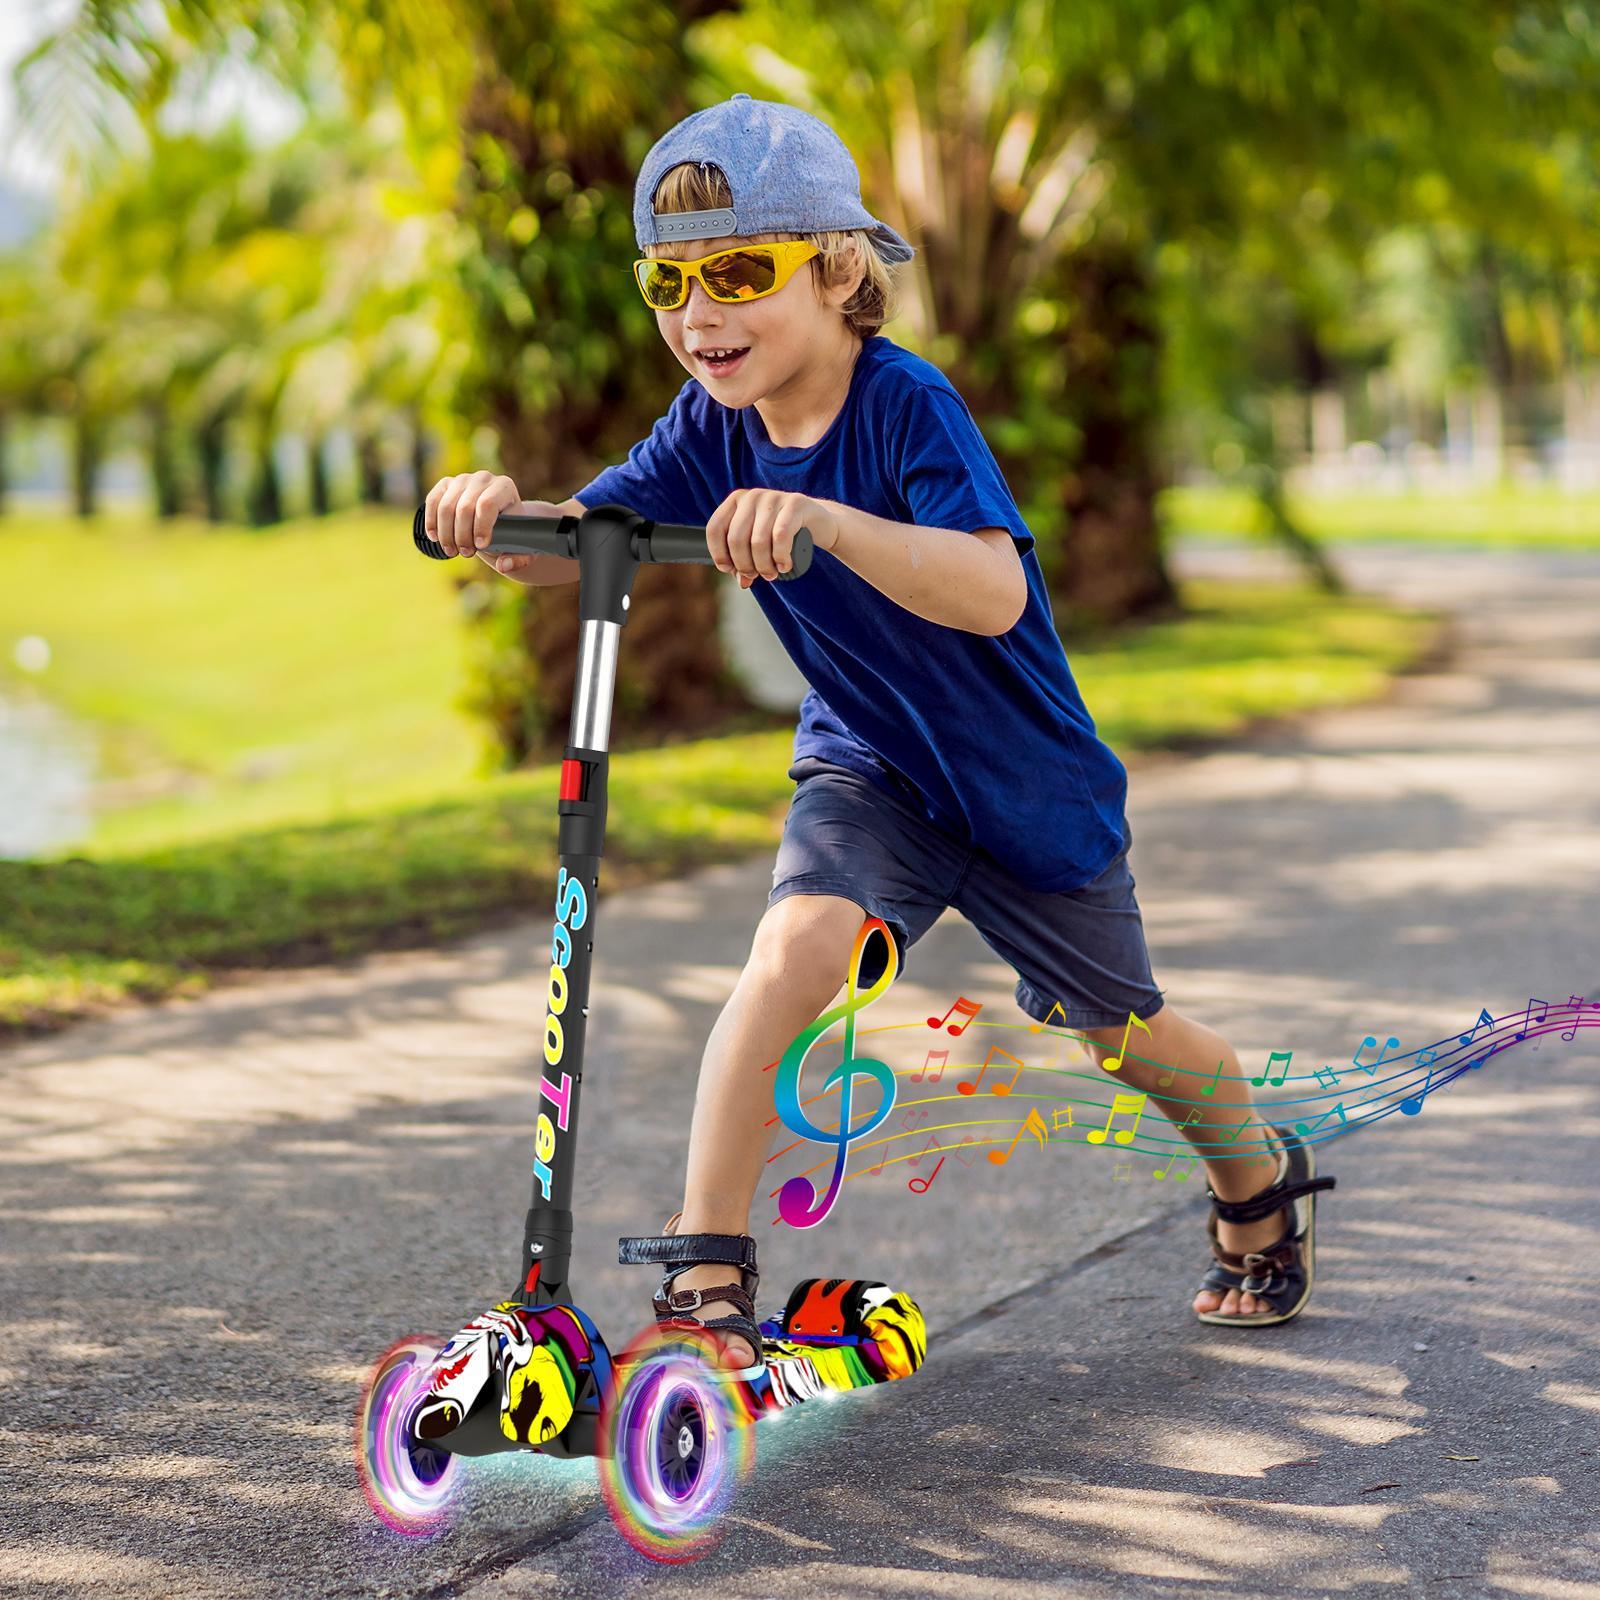 Advwin Kids Scooter Folding Kick Scooter 4 Adjustable Height with Music Light Up Wheel Scooter Lean to Steer for Ages 3-12 Graffiti